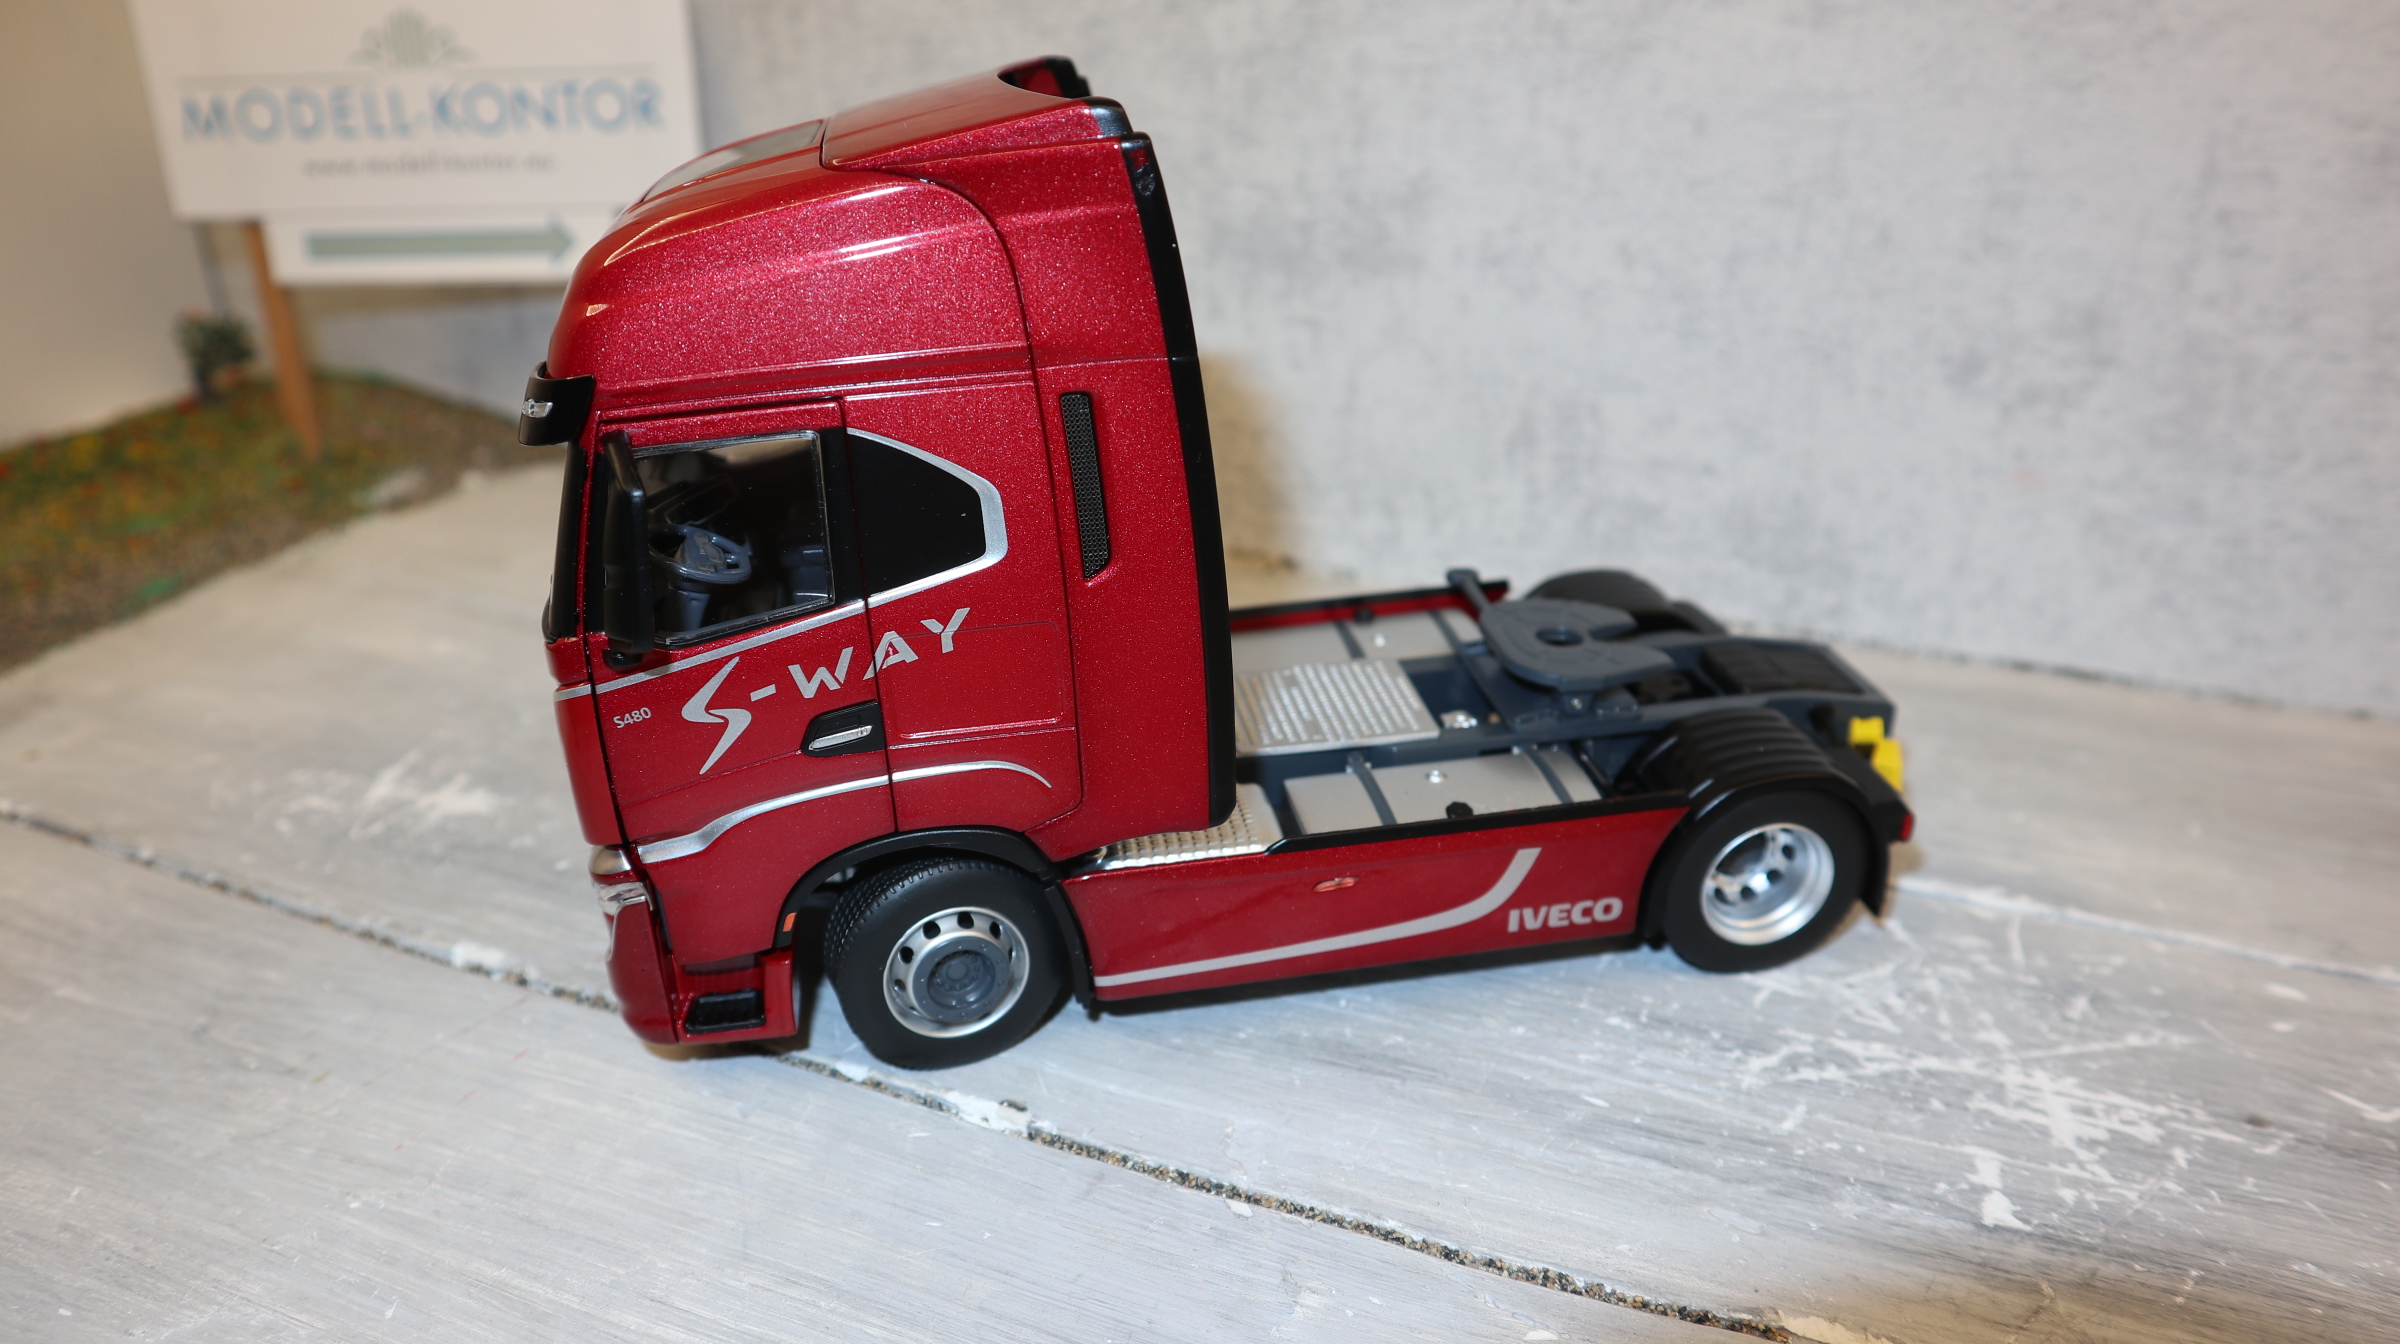 MarGe 2231-03-01 in 1:32, IVECO Stralis S-Way 4x2 rot, NEU in OVP